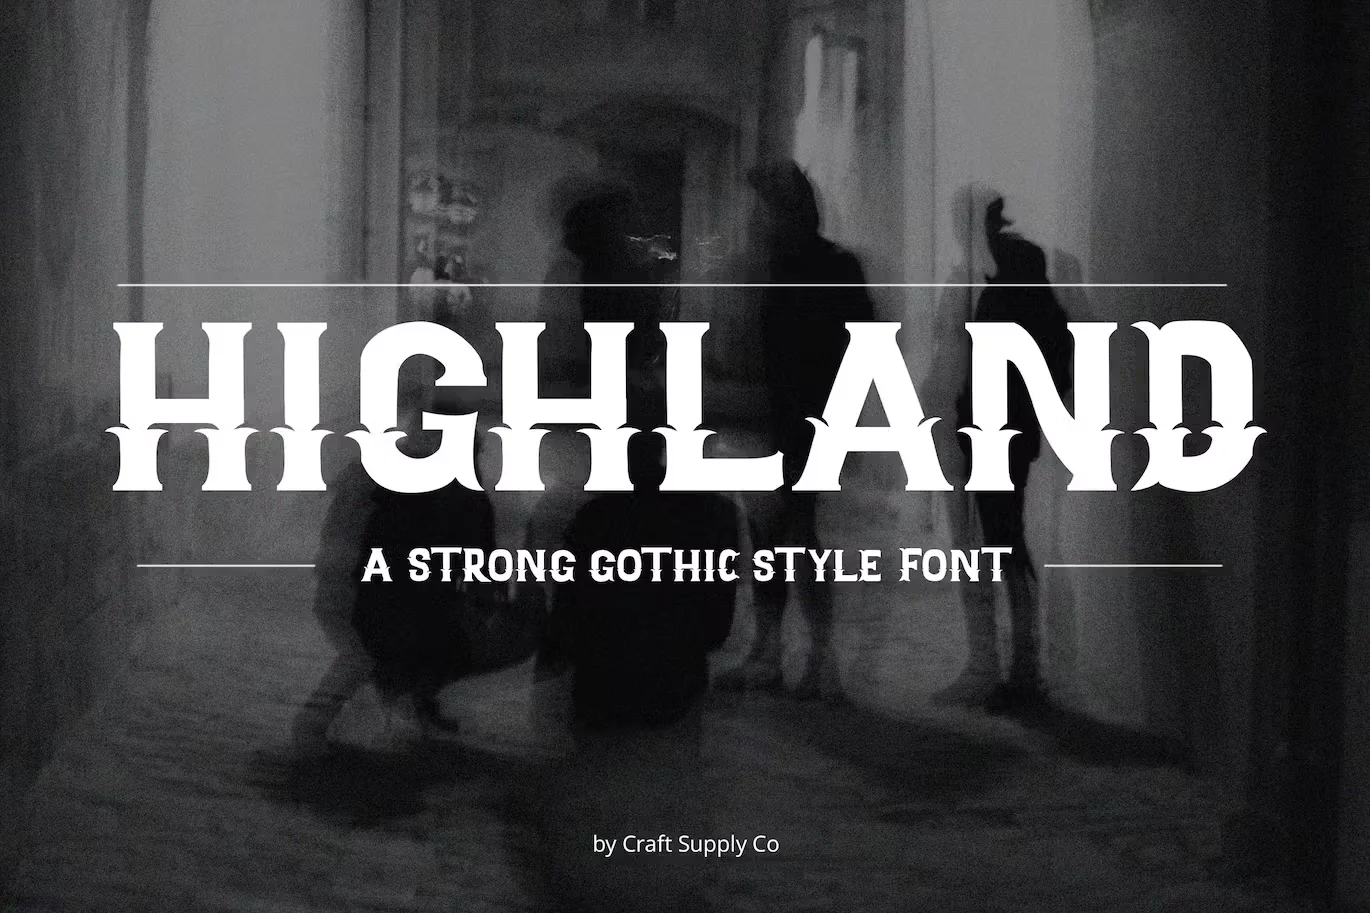 Highand – Gothic Typeface